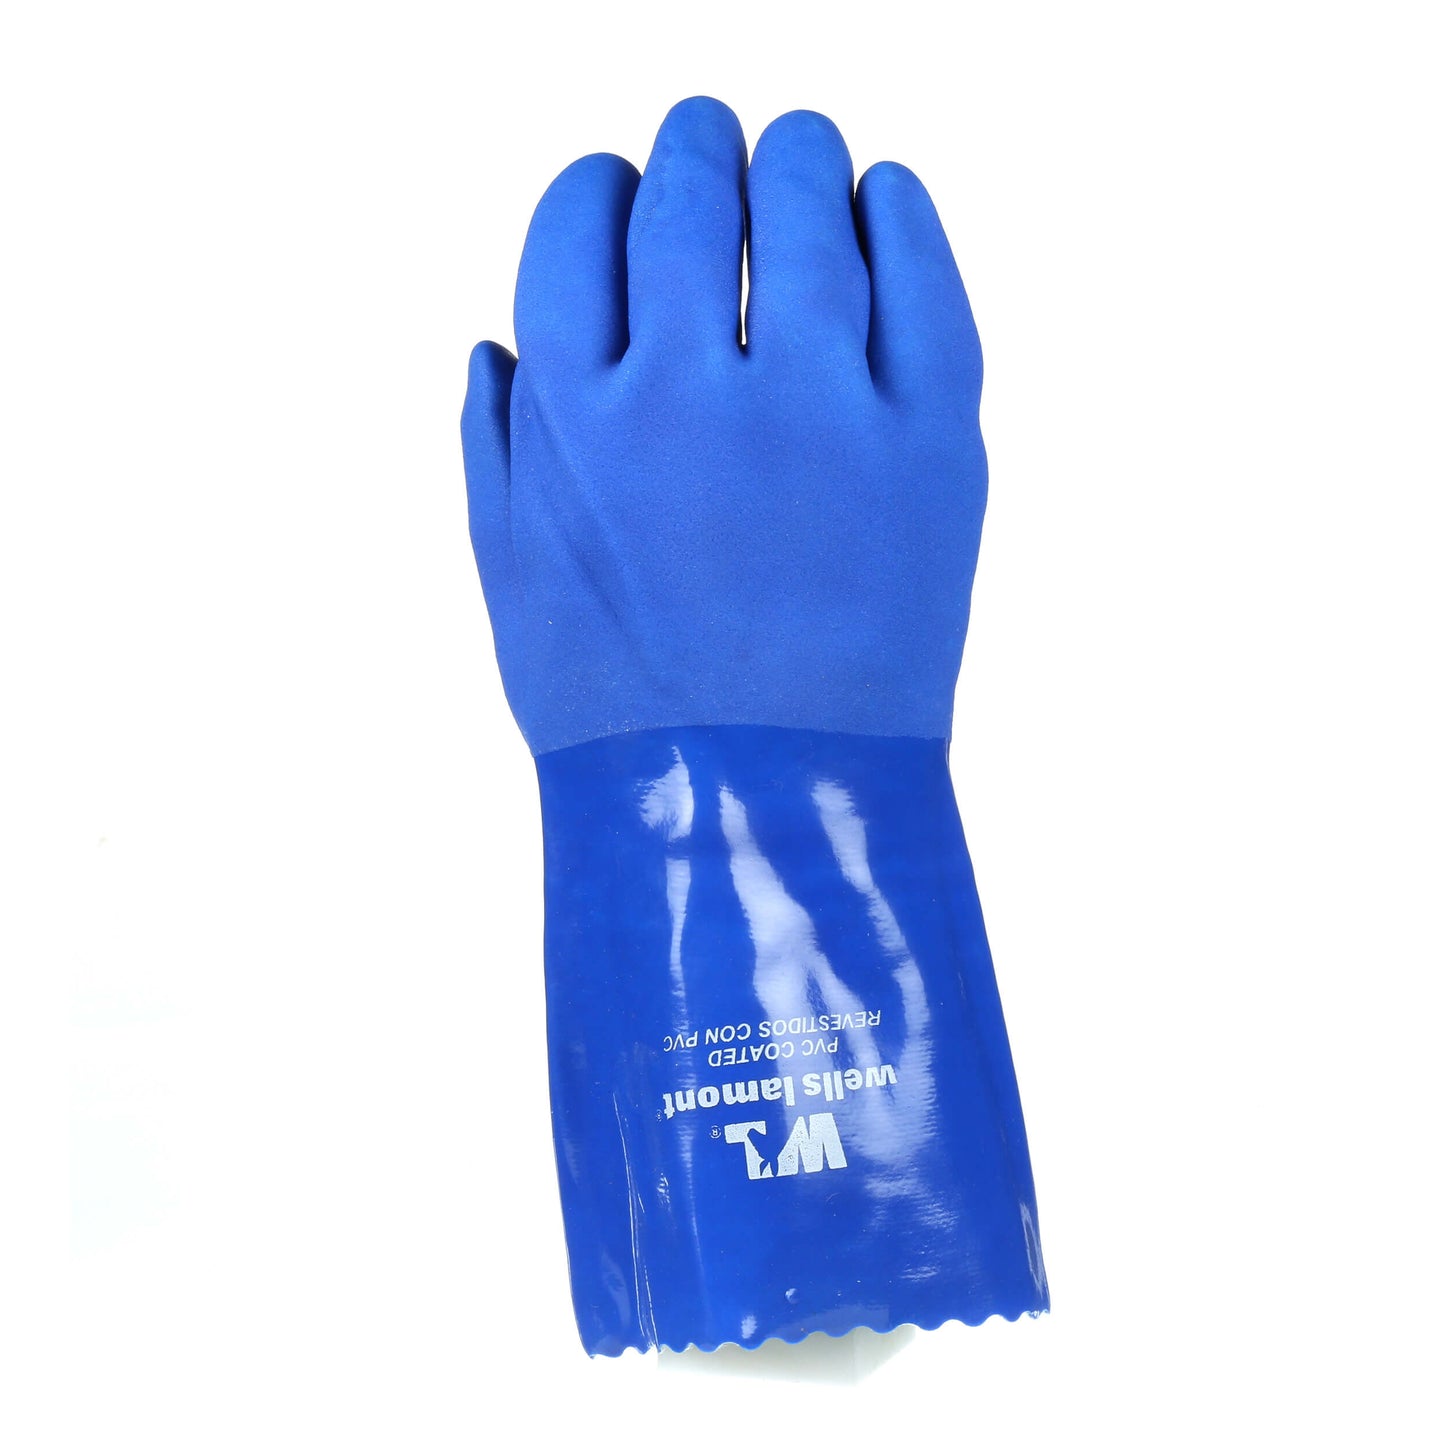 PVC Coated Heavy Duty 12-Inch Cuff Chemical Resistant Gloves - Case of 6 Pairs